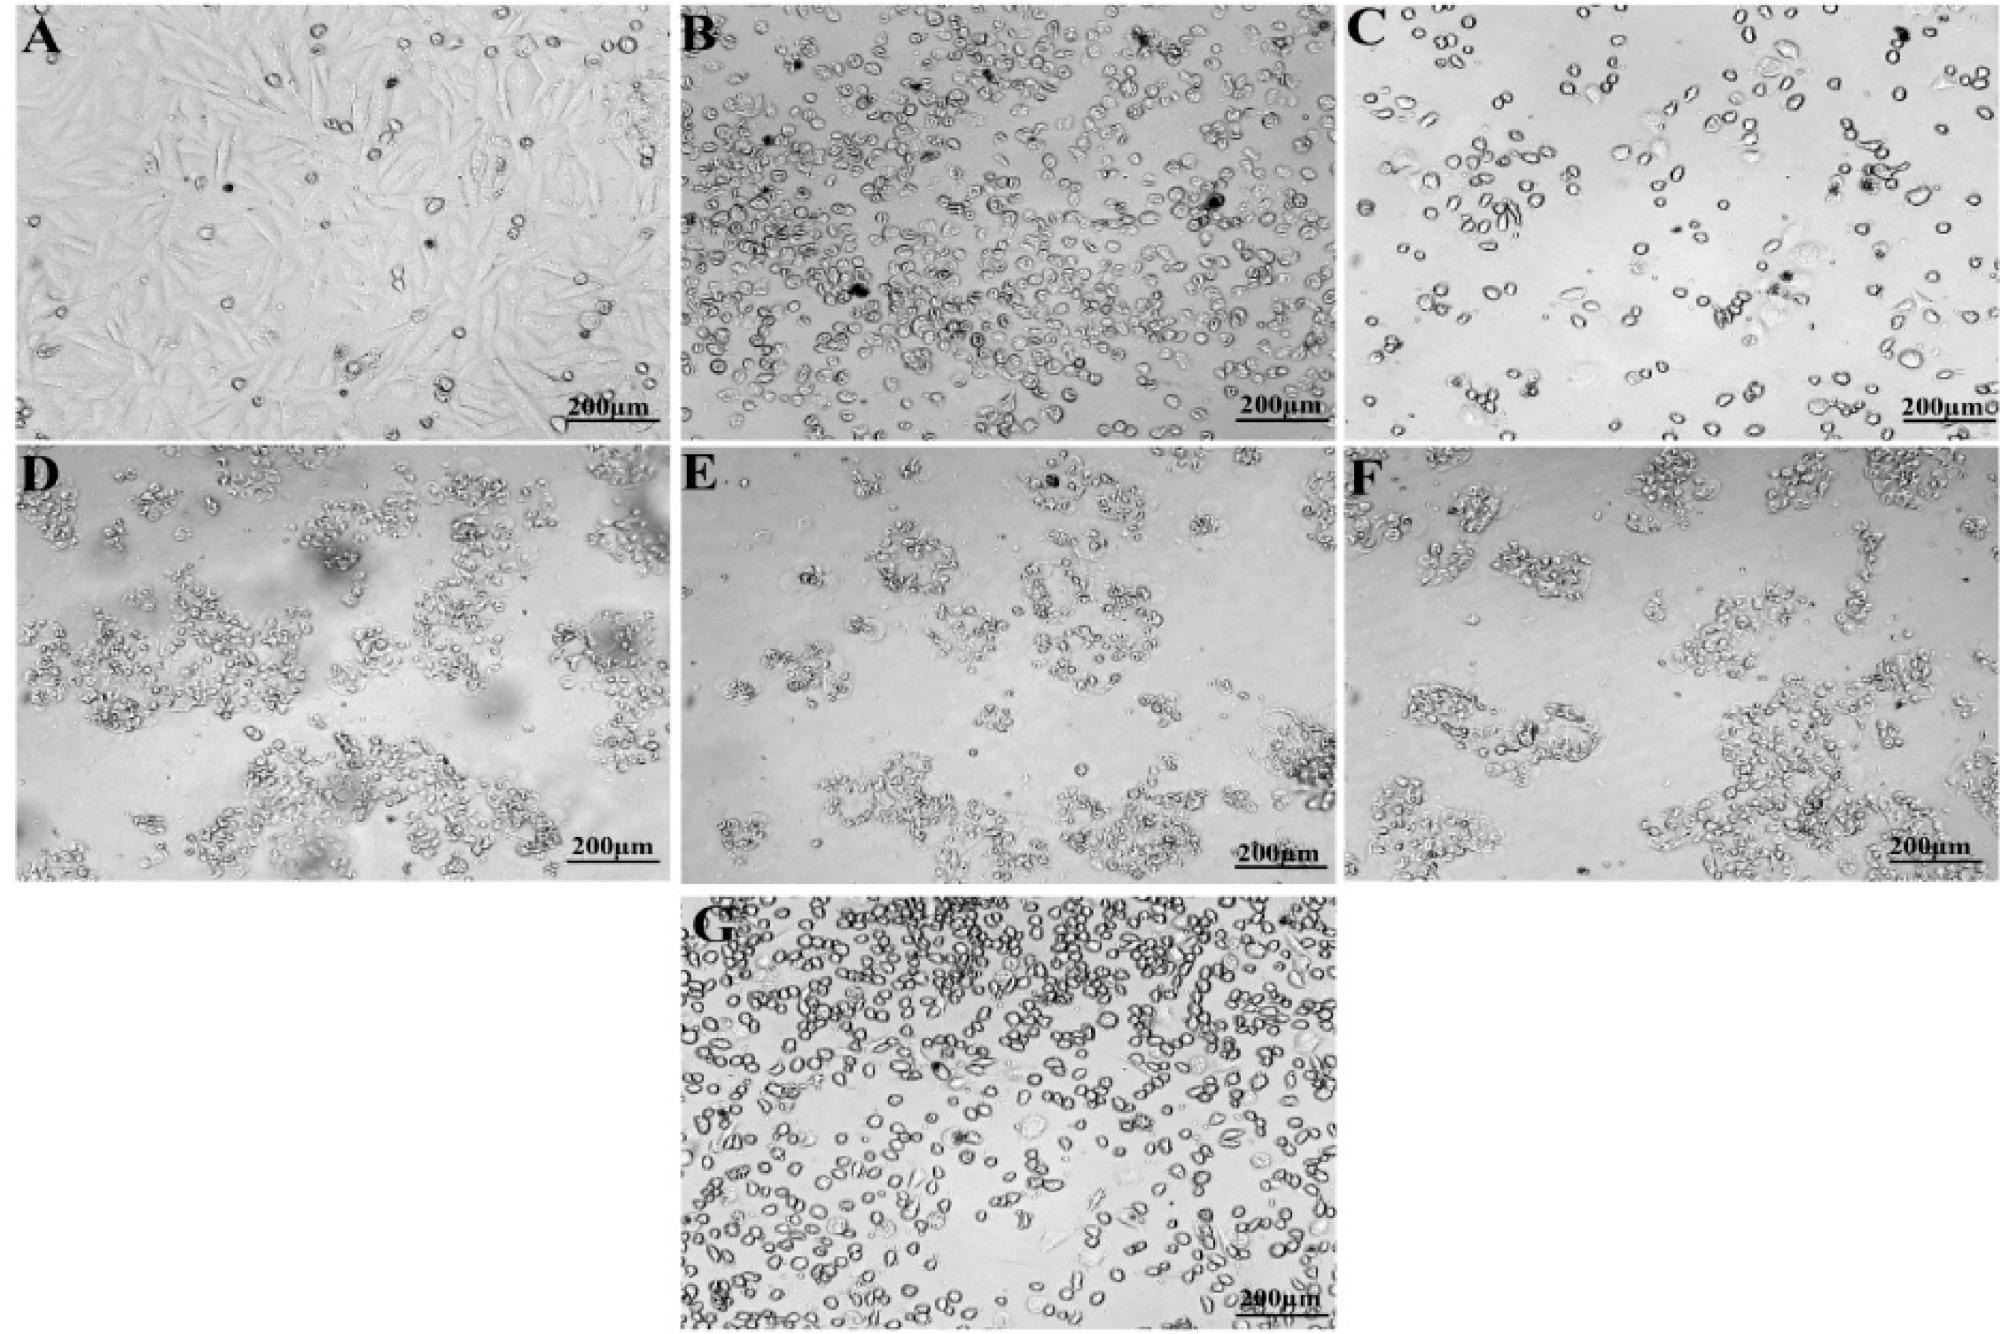 MTT assay of P-AgNPs from P. alba leaf extract against U118 MG cancer cell line. (A) Untreated cells, (B) Positive control, (C) 6.25 µg/mL, (D) 12.5 µg/mL, (E) 25 µg/mL, (F) 50 µg/mL, (G) 100 µg/mL.